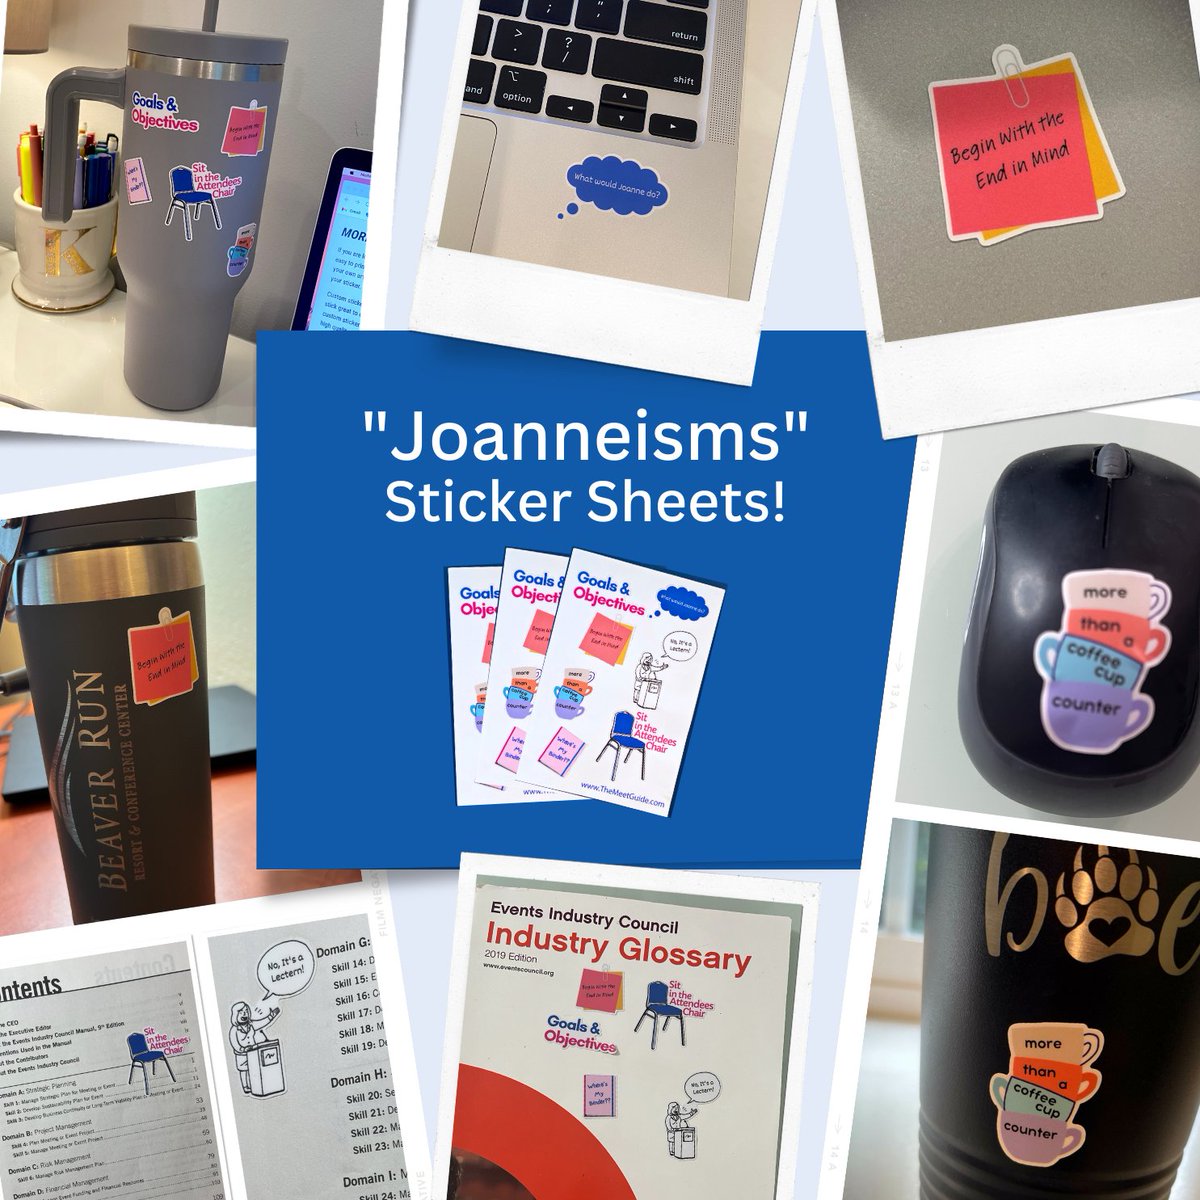 Your favorite “Joanneisms” now on a sticker sheet!

Now available for purchase on The MeetGuide website: lnkd.in/eyZVaPij

❗Special $10 introductory price for a single sticker sheet!
#themeetguide #cmp #meetingprofs #eventprofs #eventplanners #Joanneisms #stickers